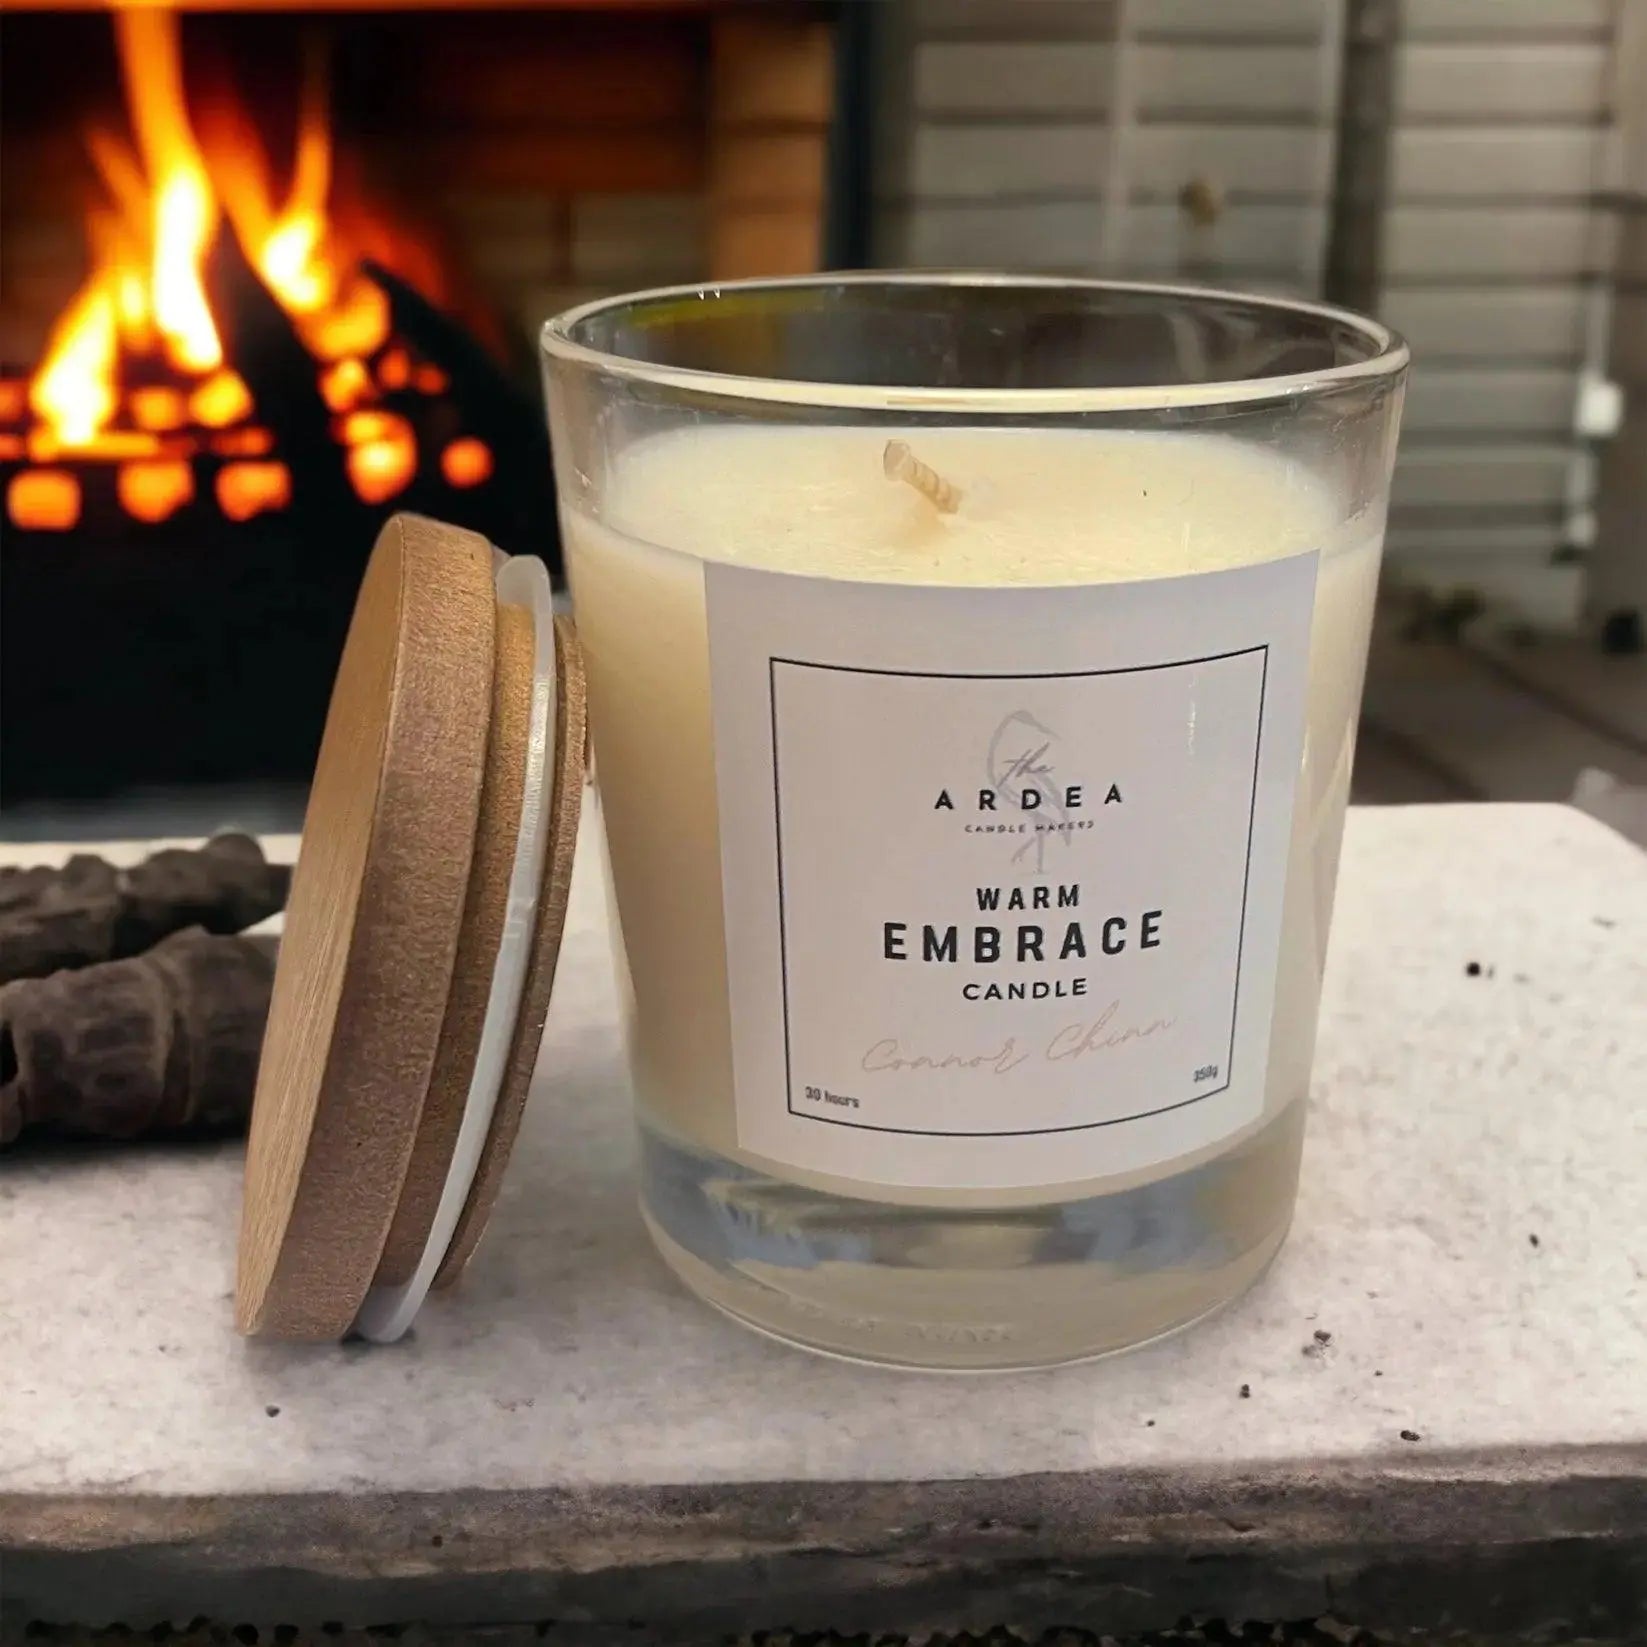 Warm Embrace Candle - 600g - The Ardea Candle Makers